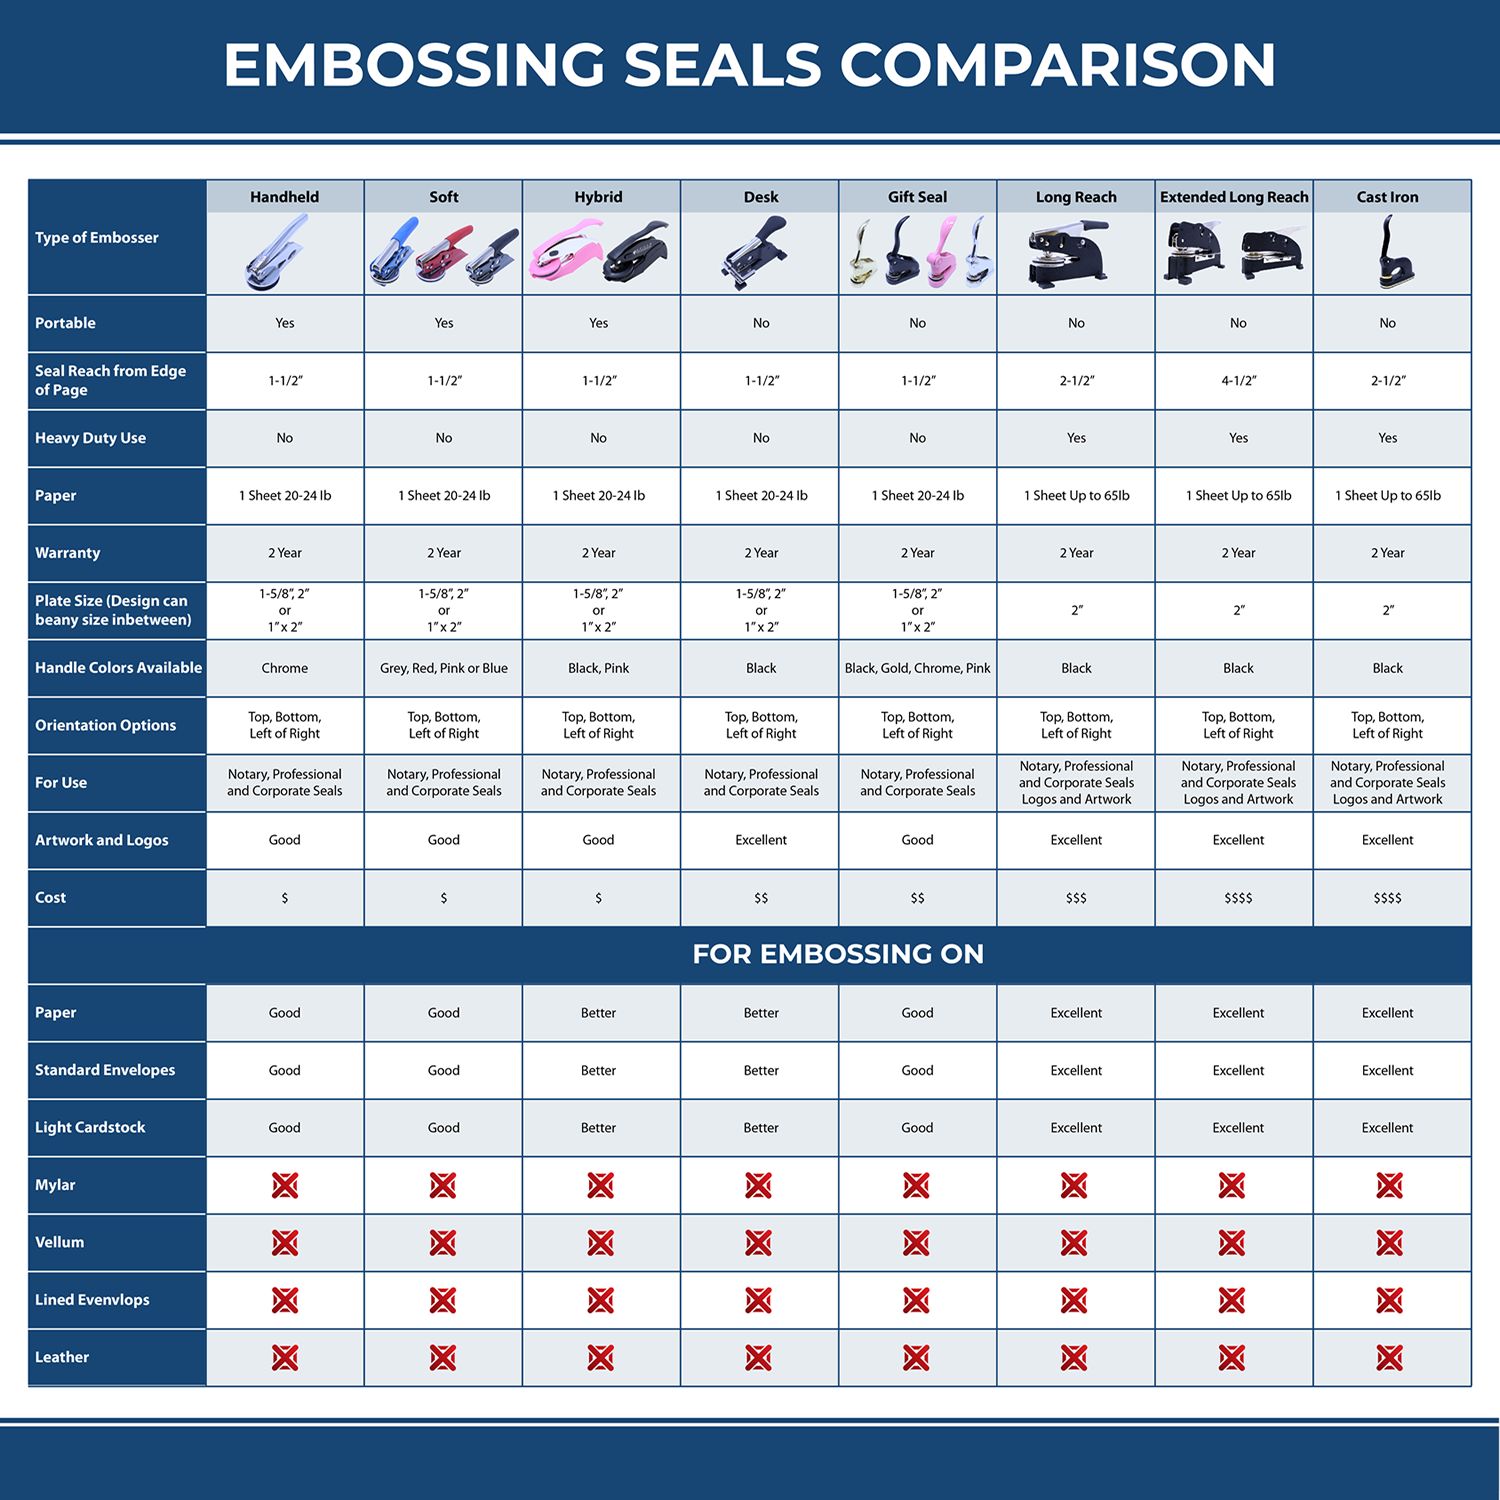 A comparison chart for the different types of mount models available for the Handheld Virginia Land Surveyor Seal.